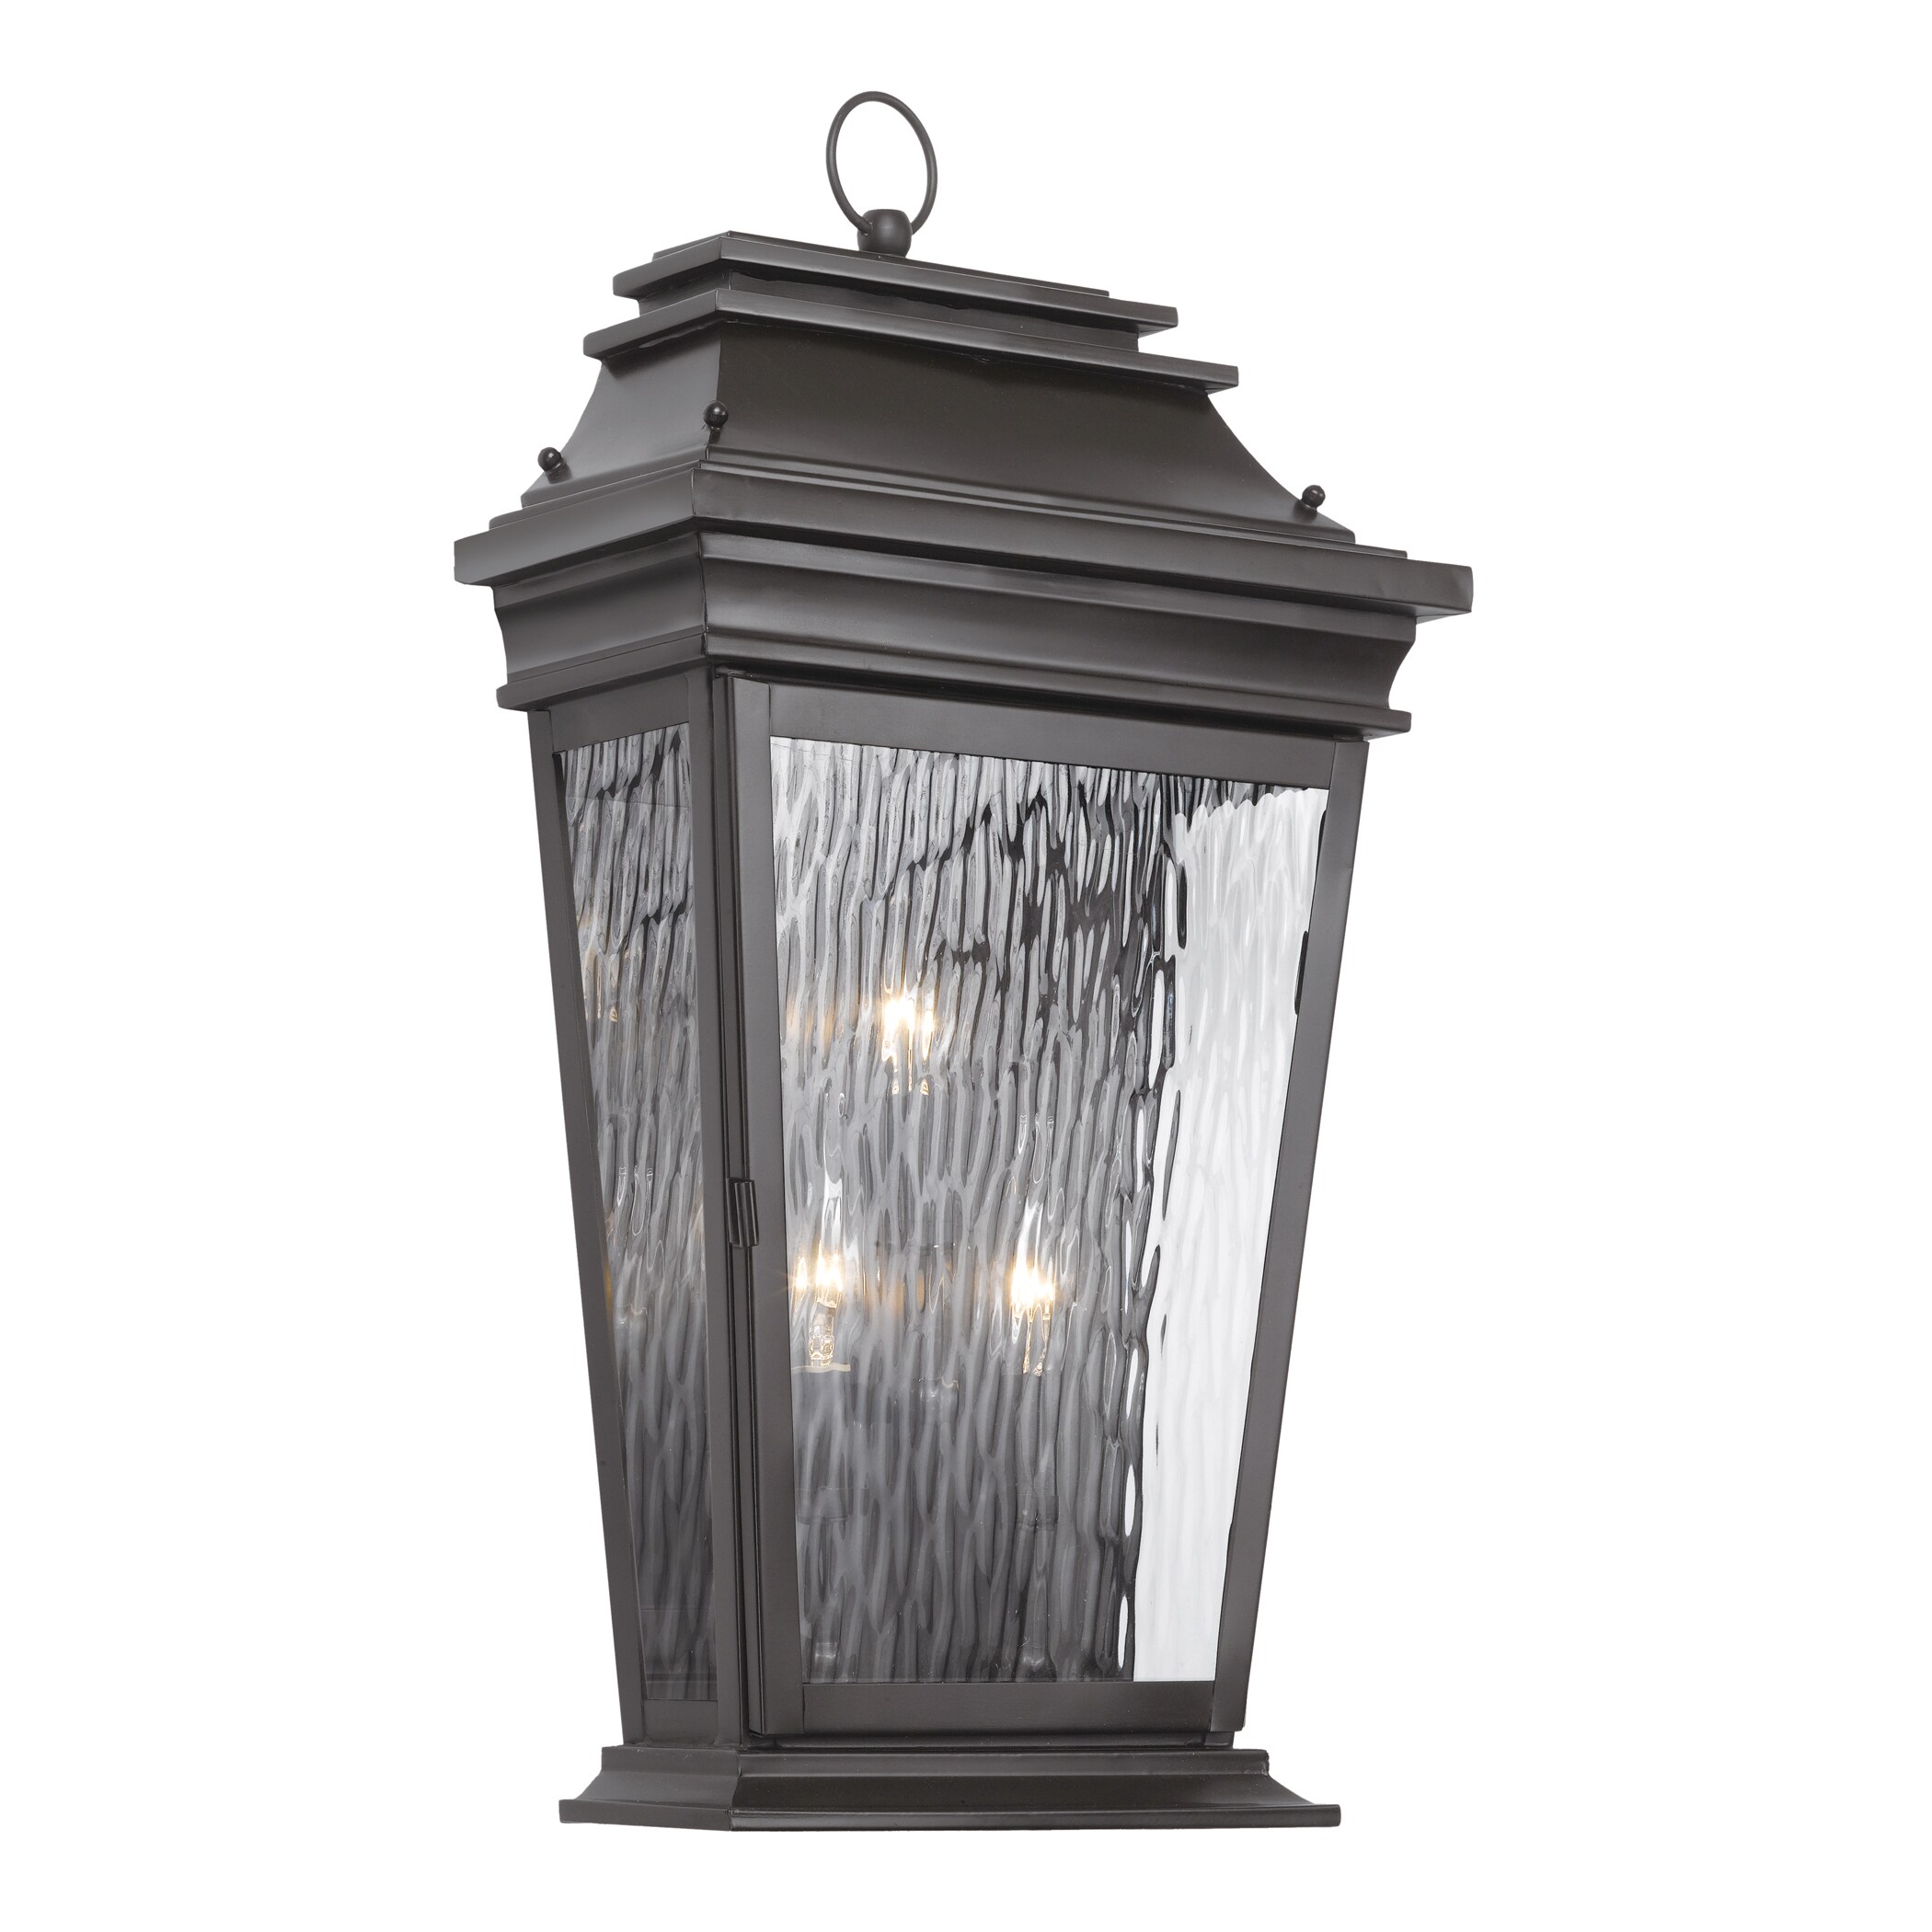 Provincial Collection Outdoor Solid Brass Charcoal Finish Wall Lantern